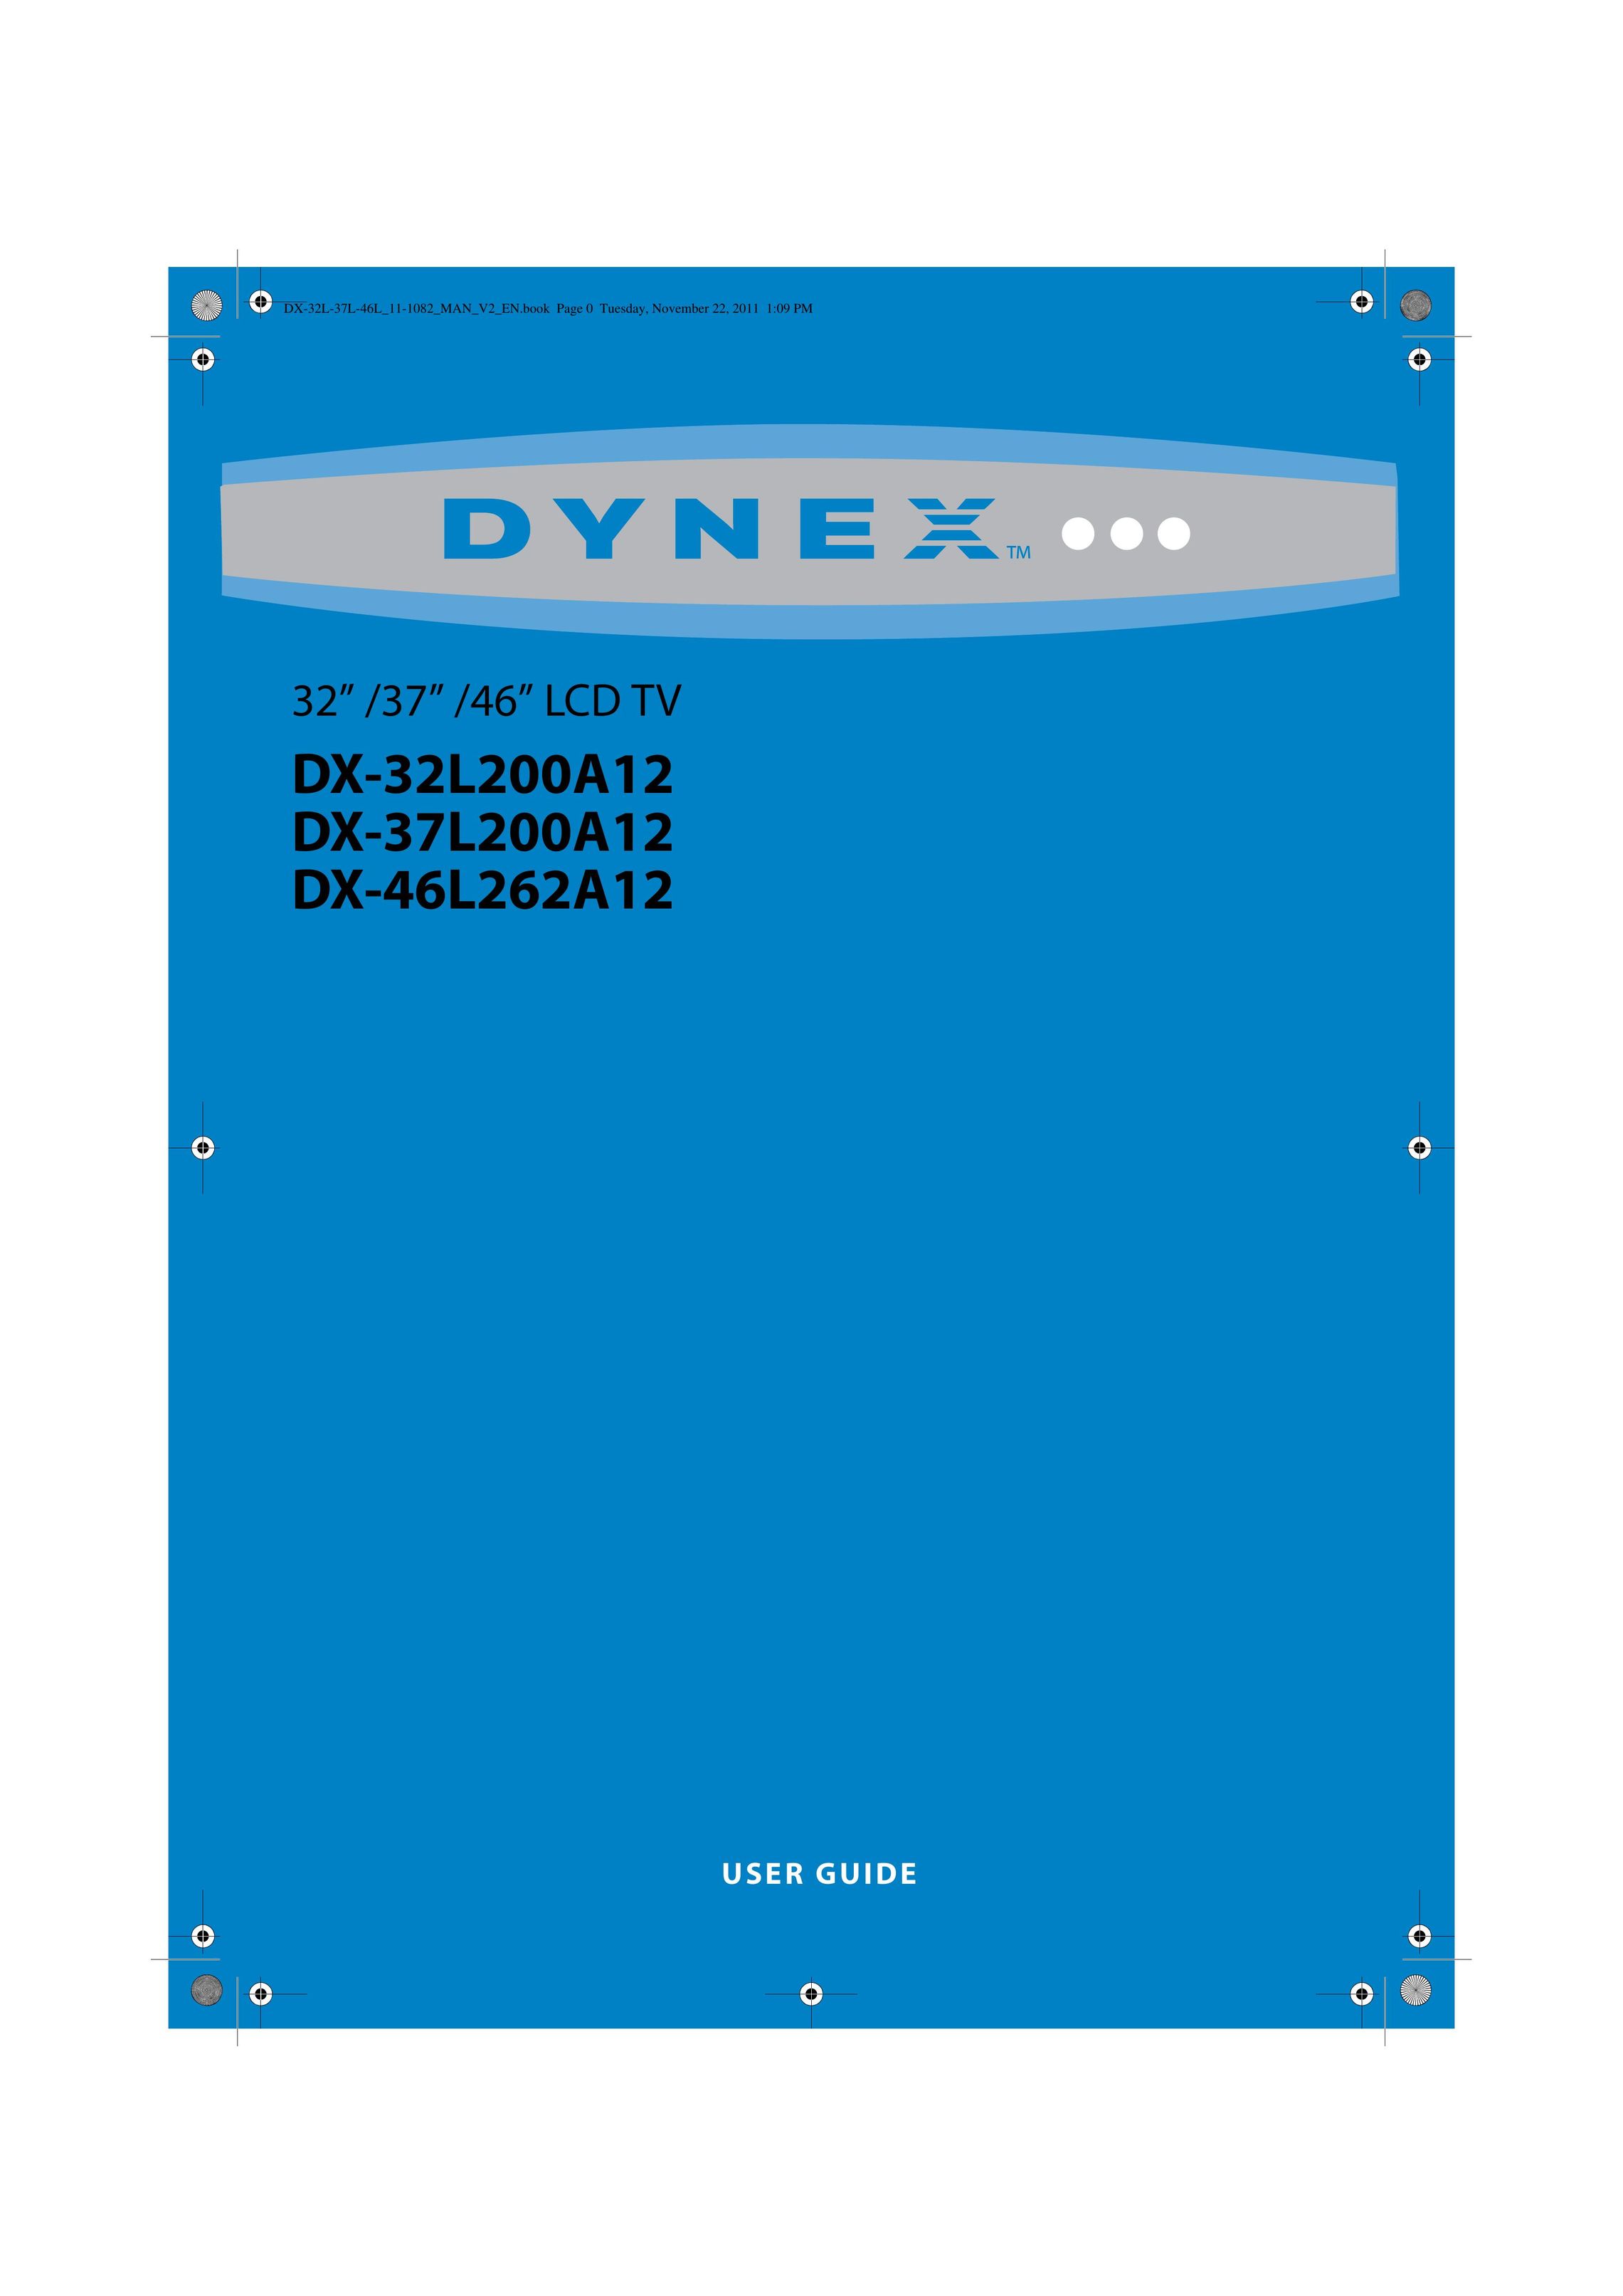 Dynex DX-32L200A12 Home Theater Screen User Manual